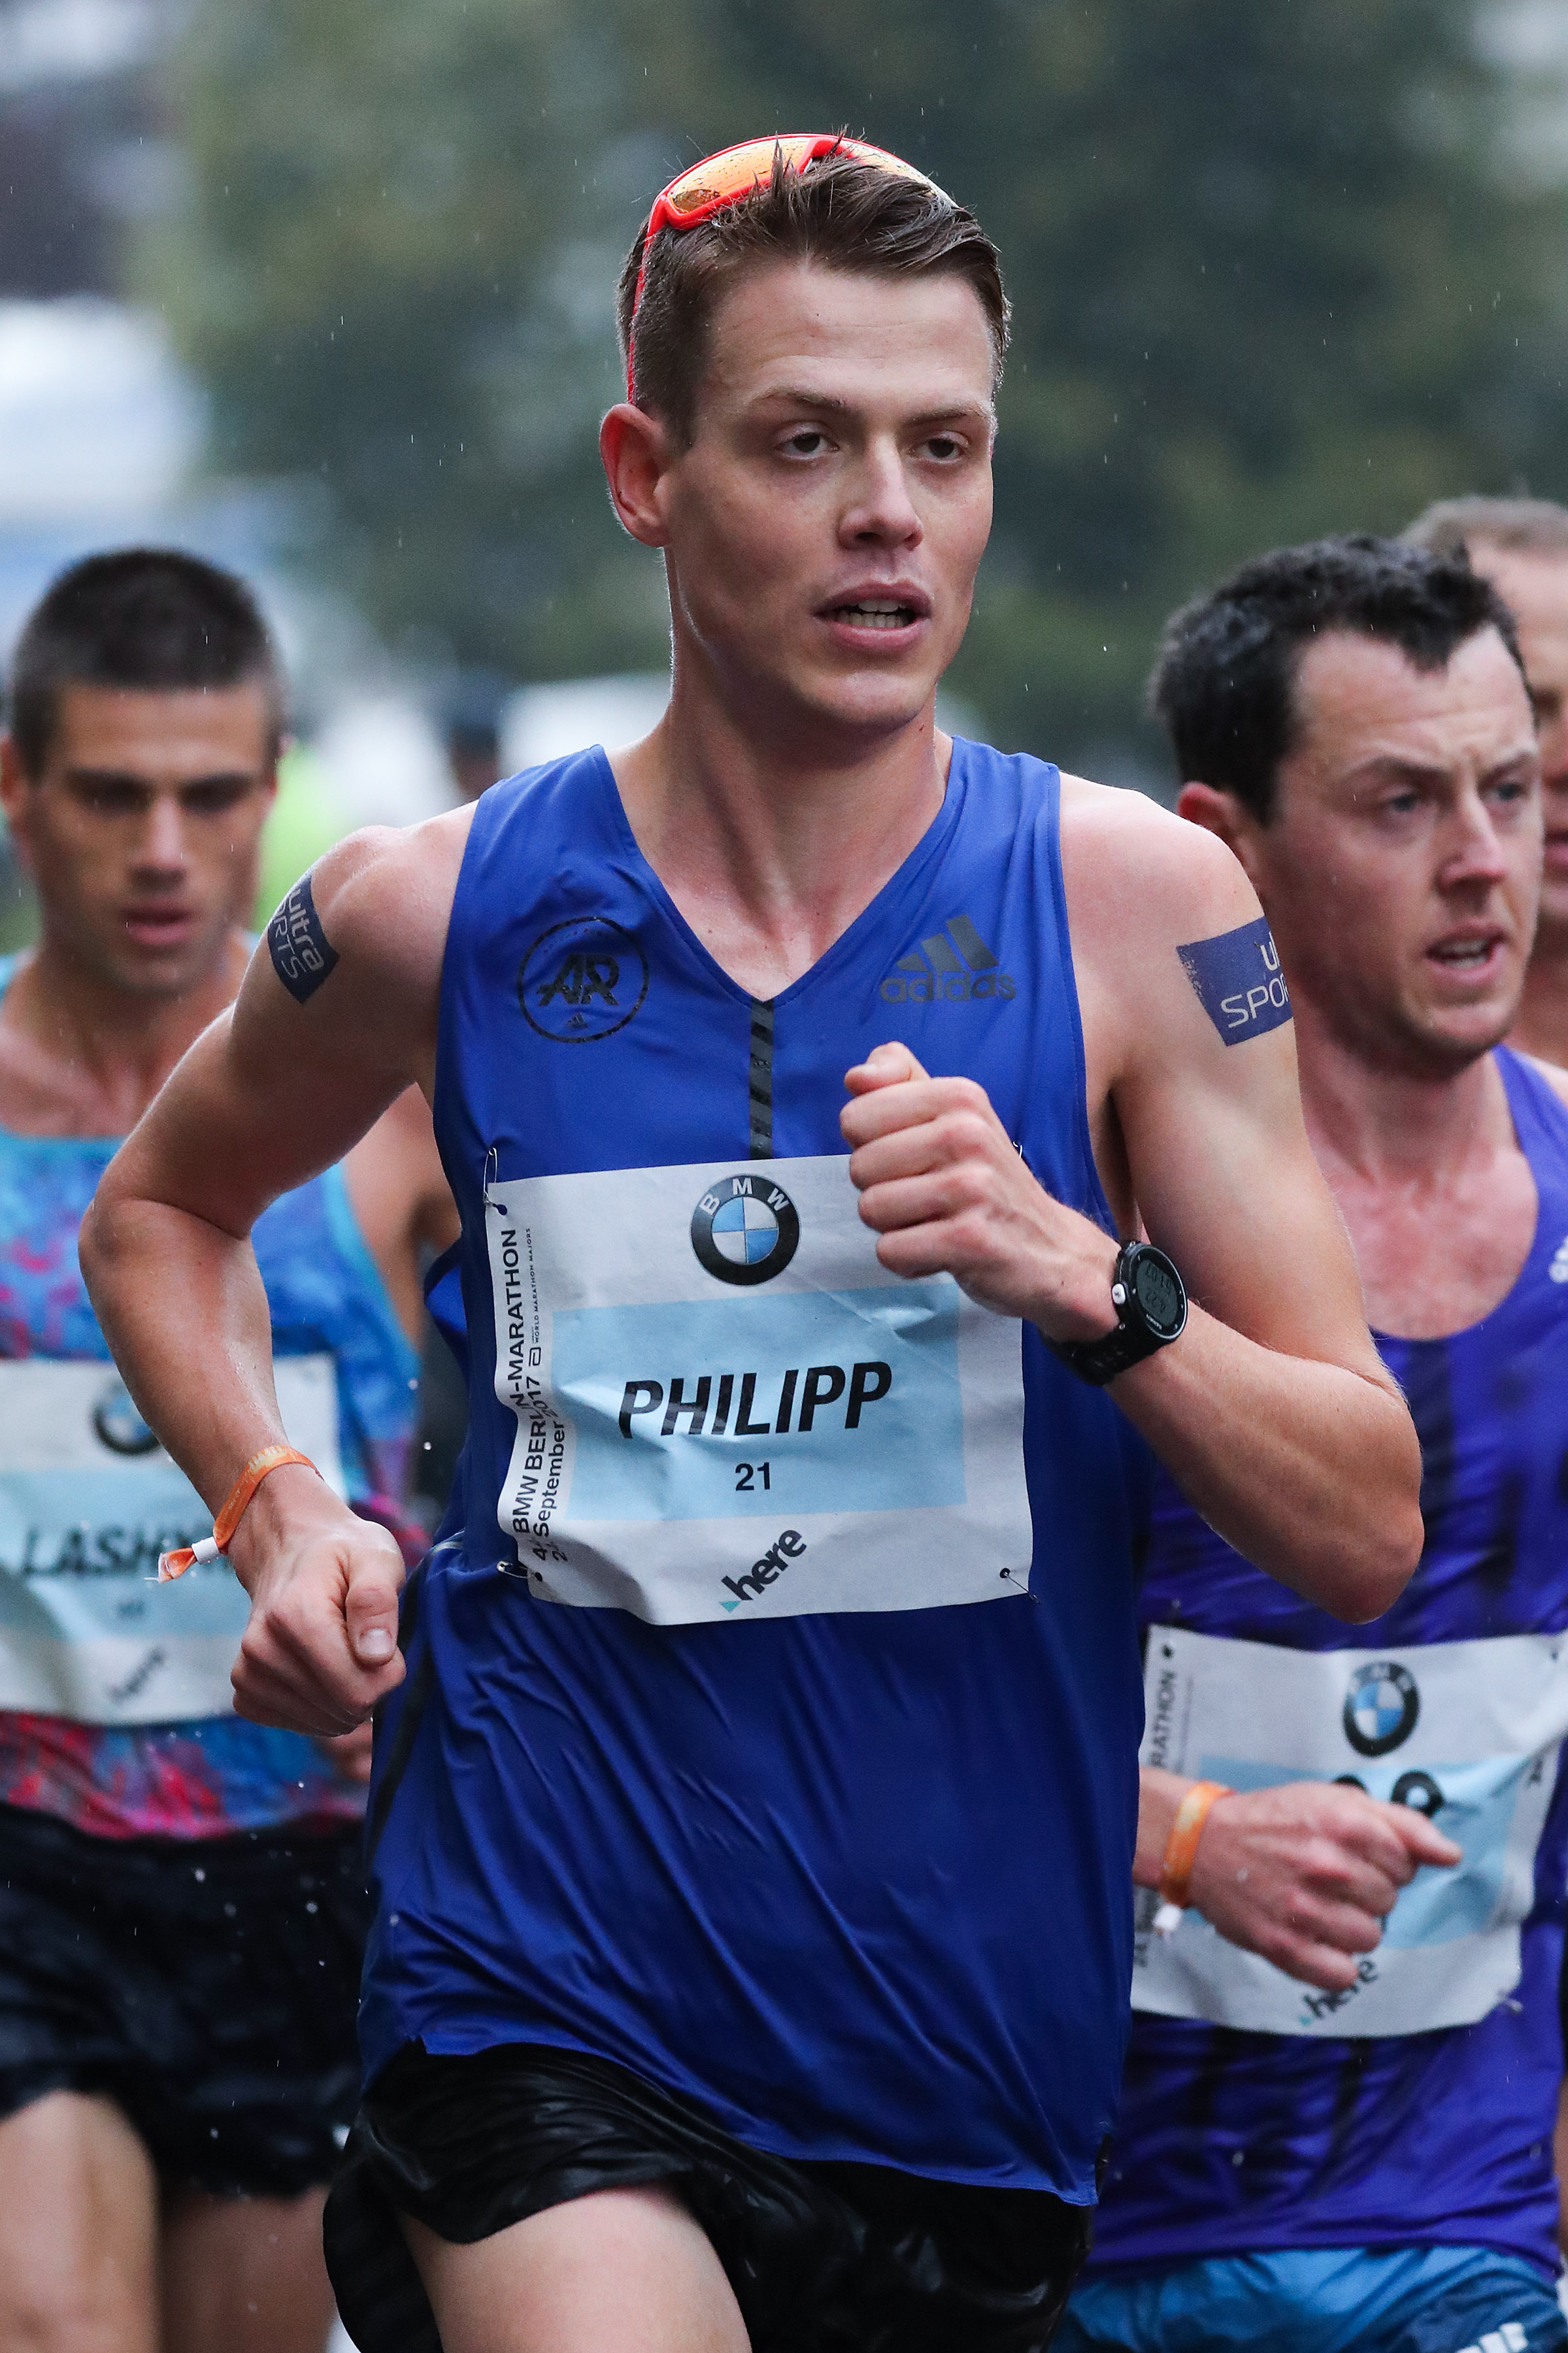 Philipp Pflieger is back in Berlin and ready to race the BMW BERLIN-MARATHON again